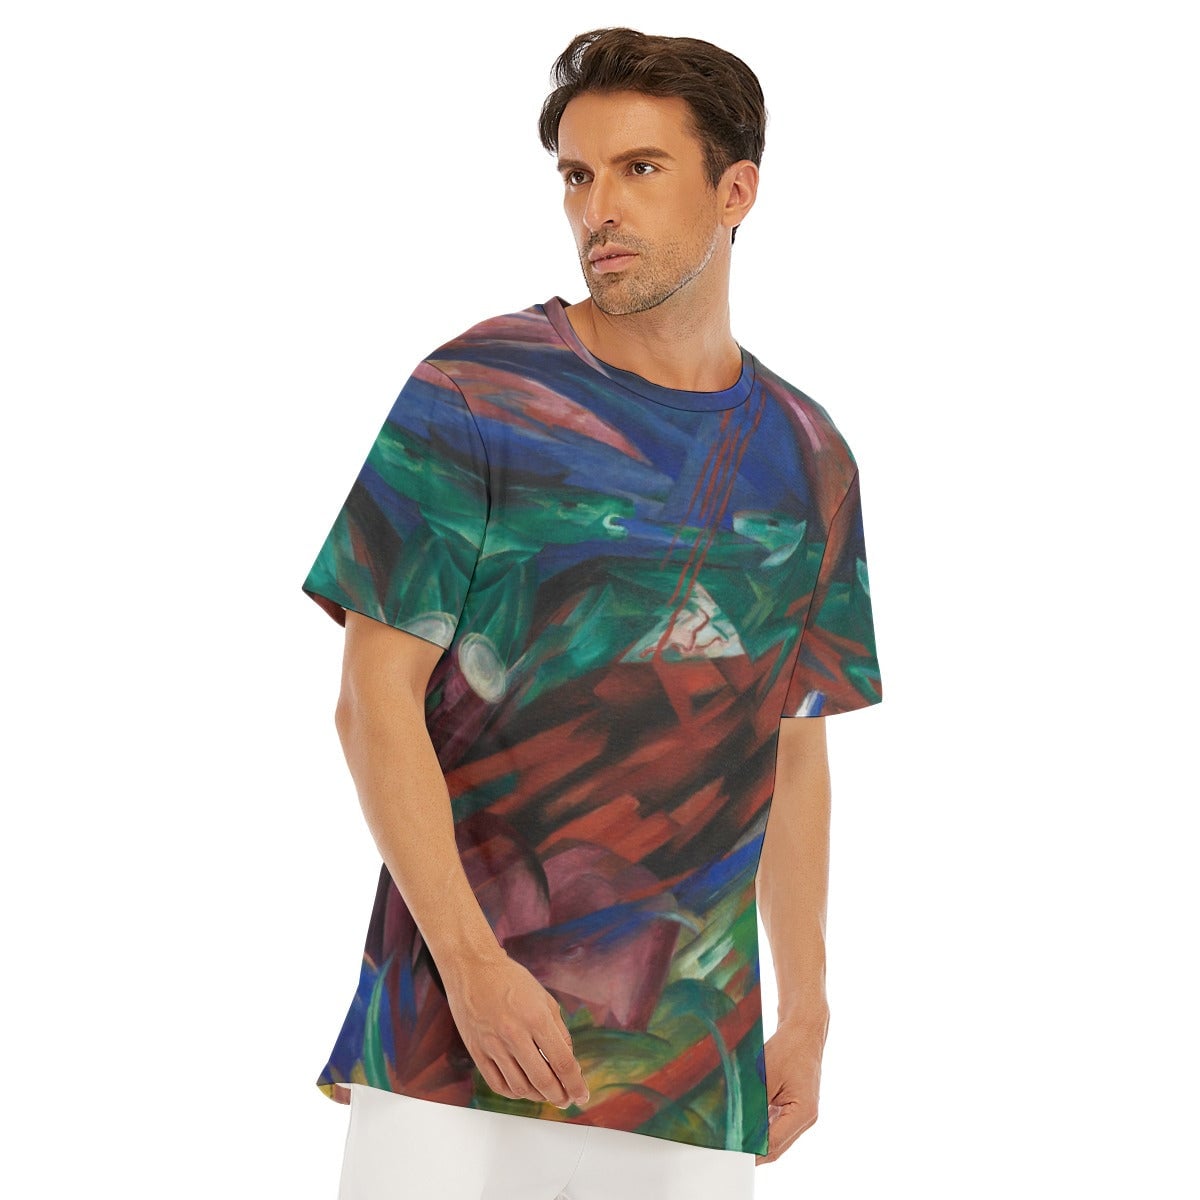 Franz Marc’s Animal Fates T-Shirt - Famous Painting Art Tee